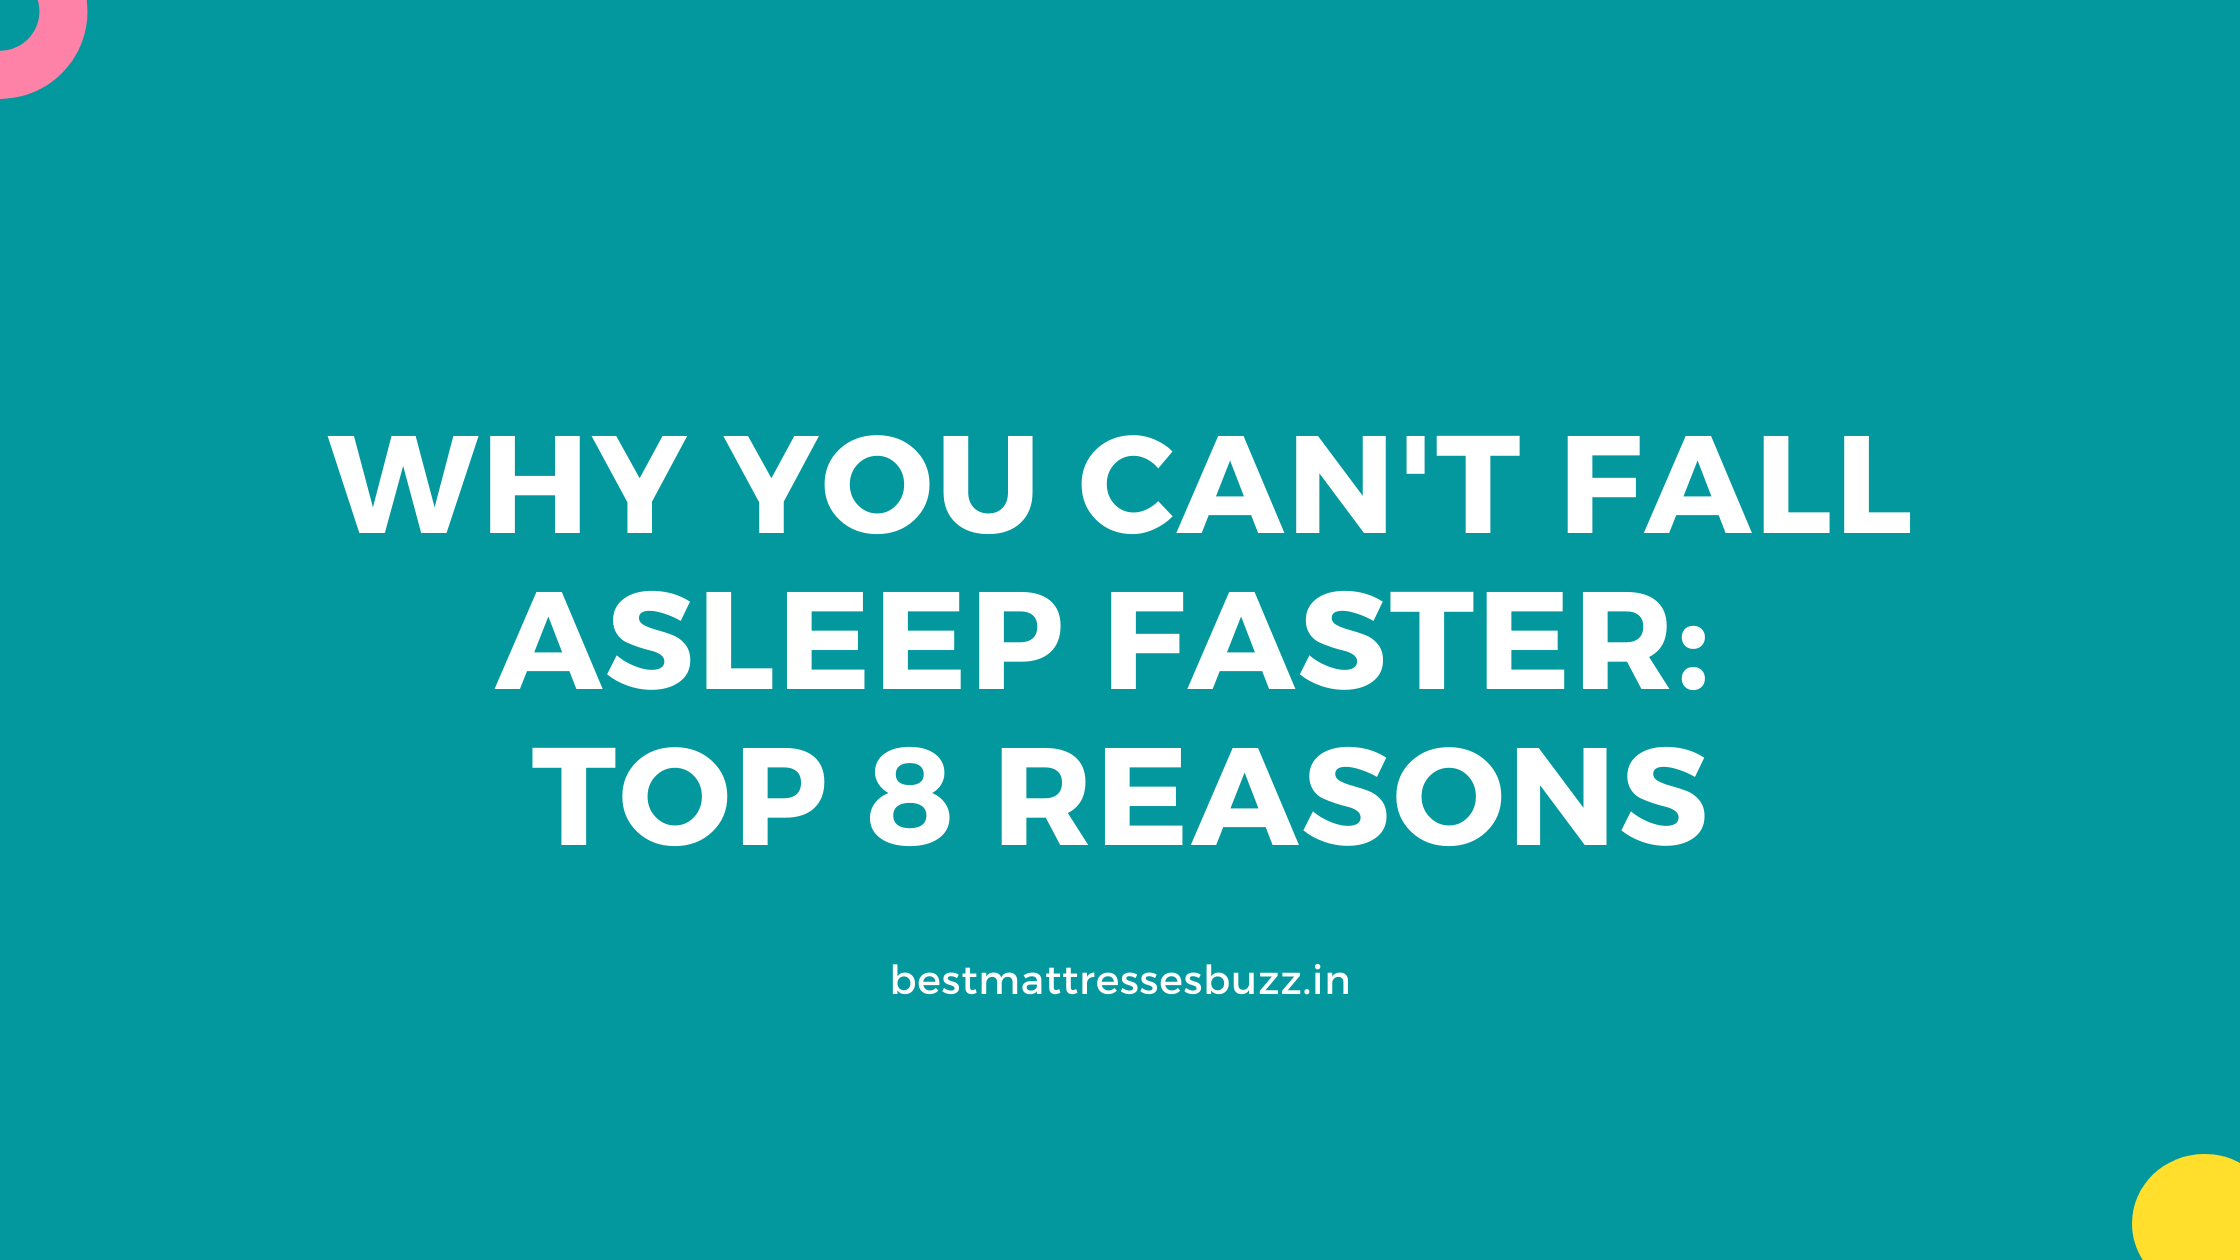 why you can’t fall asleep faster